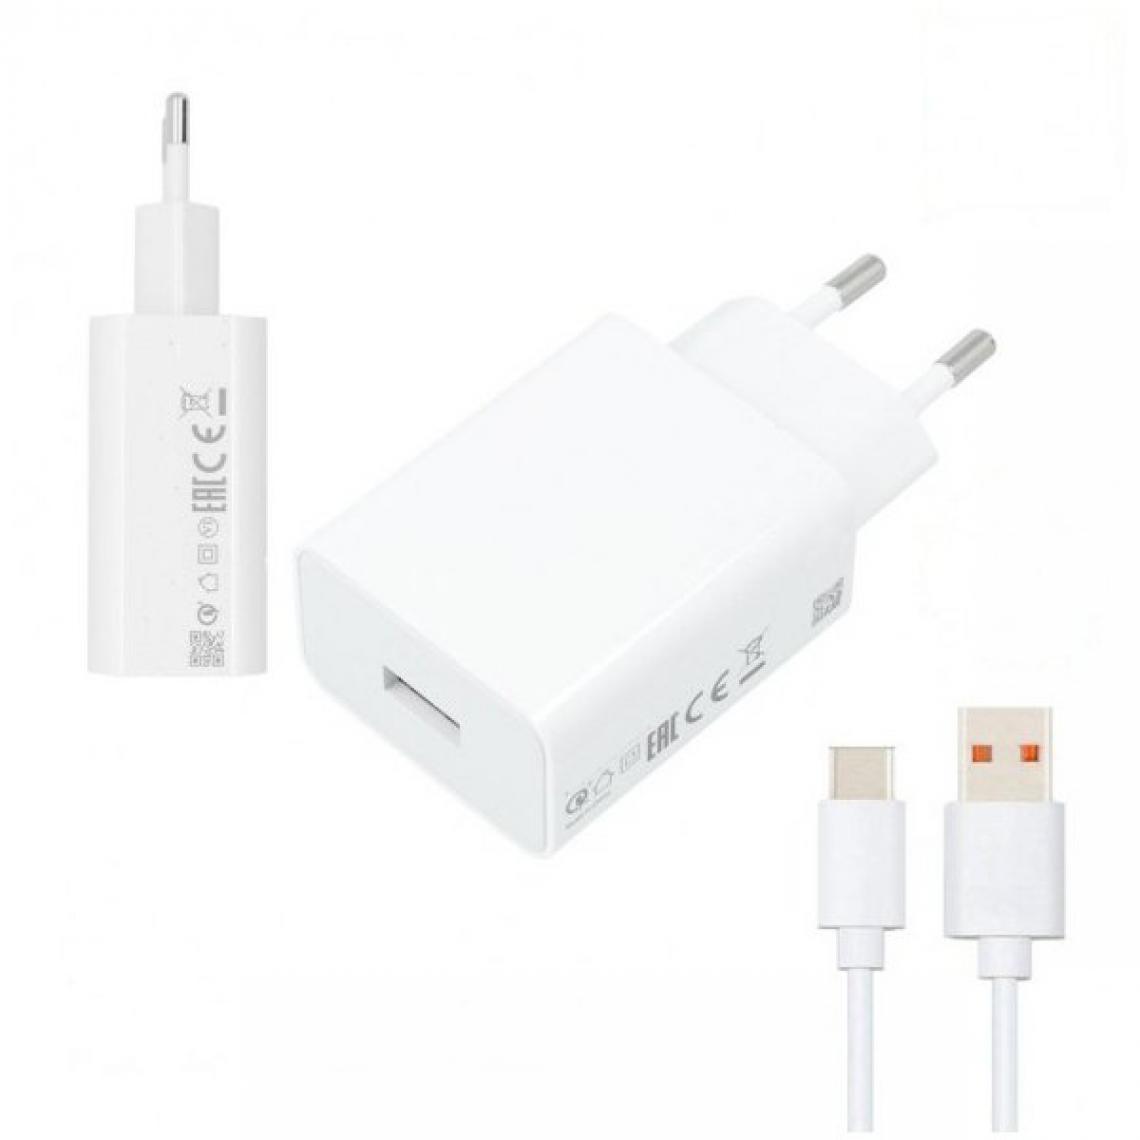 Phonecare - Kit Chargeur Turbo Fast Charge 33W 3A USB + Câble de Charge Turbo Fast Charge 5A Type-C 1M - Xiaomi Mi 10s - Autres accessoires smartphone